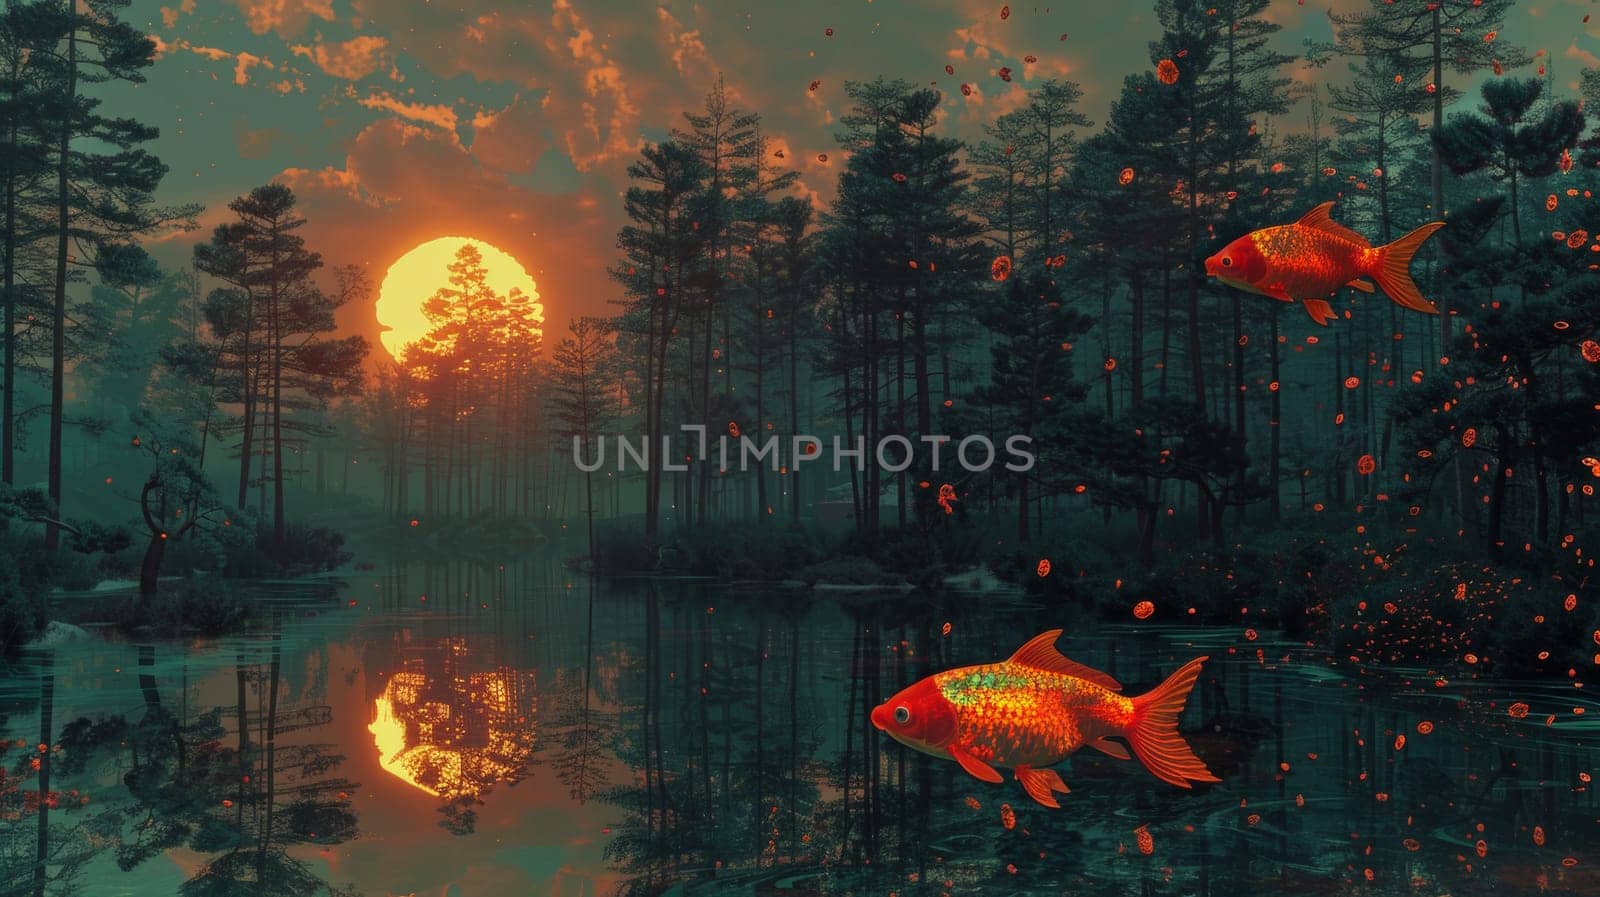 Two gold fish swimming in a pond at sunset with trees and water